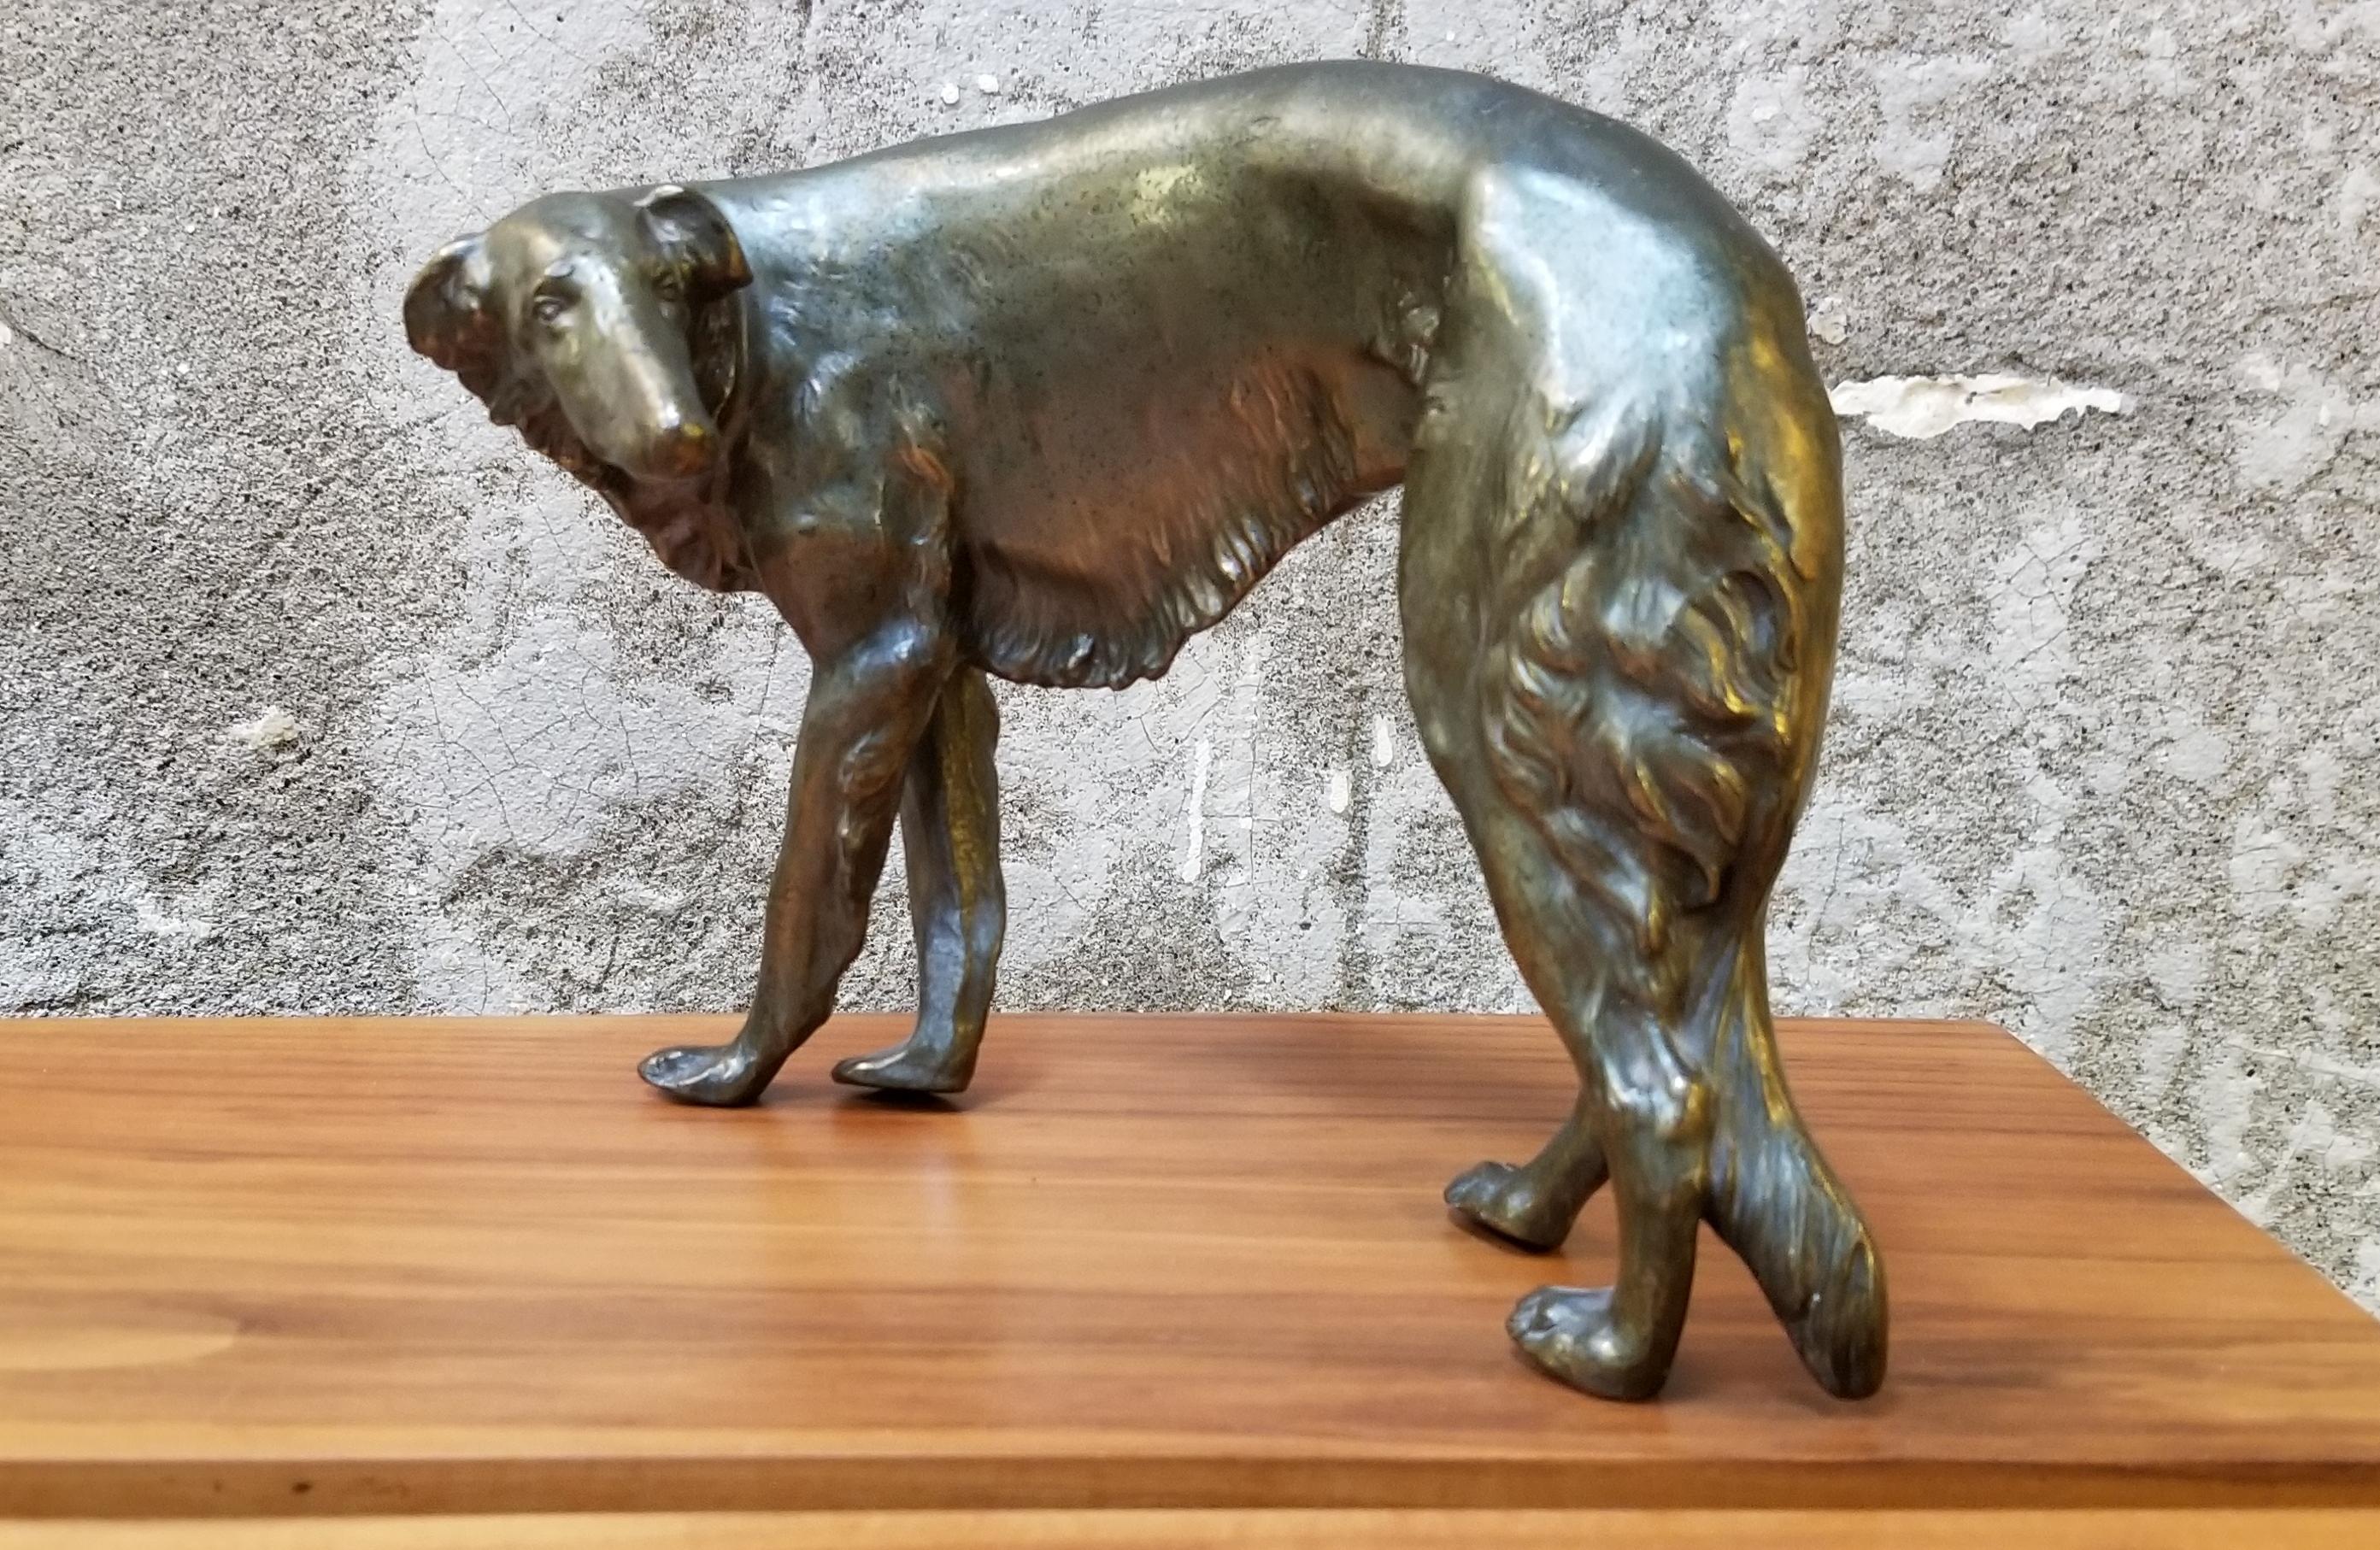 A 1920s bronze patinated, cast spelter figure of a Borzoi by Jennings Brothers. Early 20th century maker of detailed cast figures of dogs and various animals, desk accessories and various decorative objects. Signed JB. Excellent, original condition.